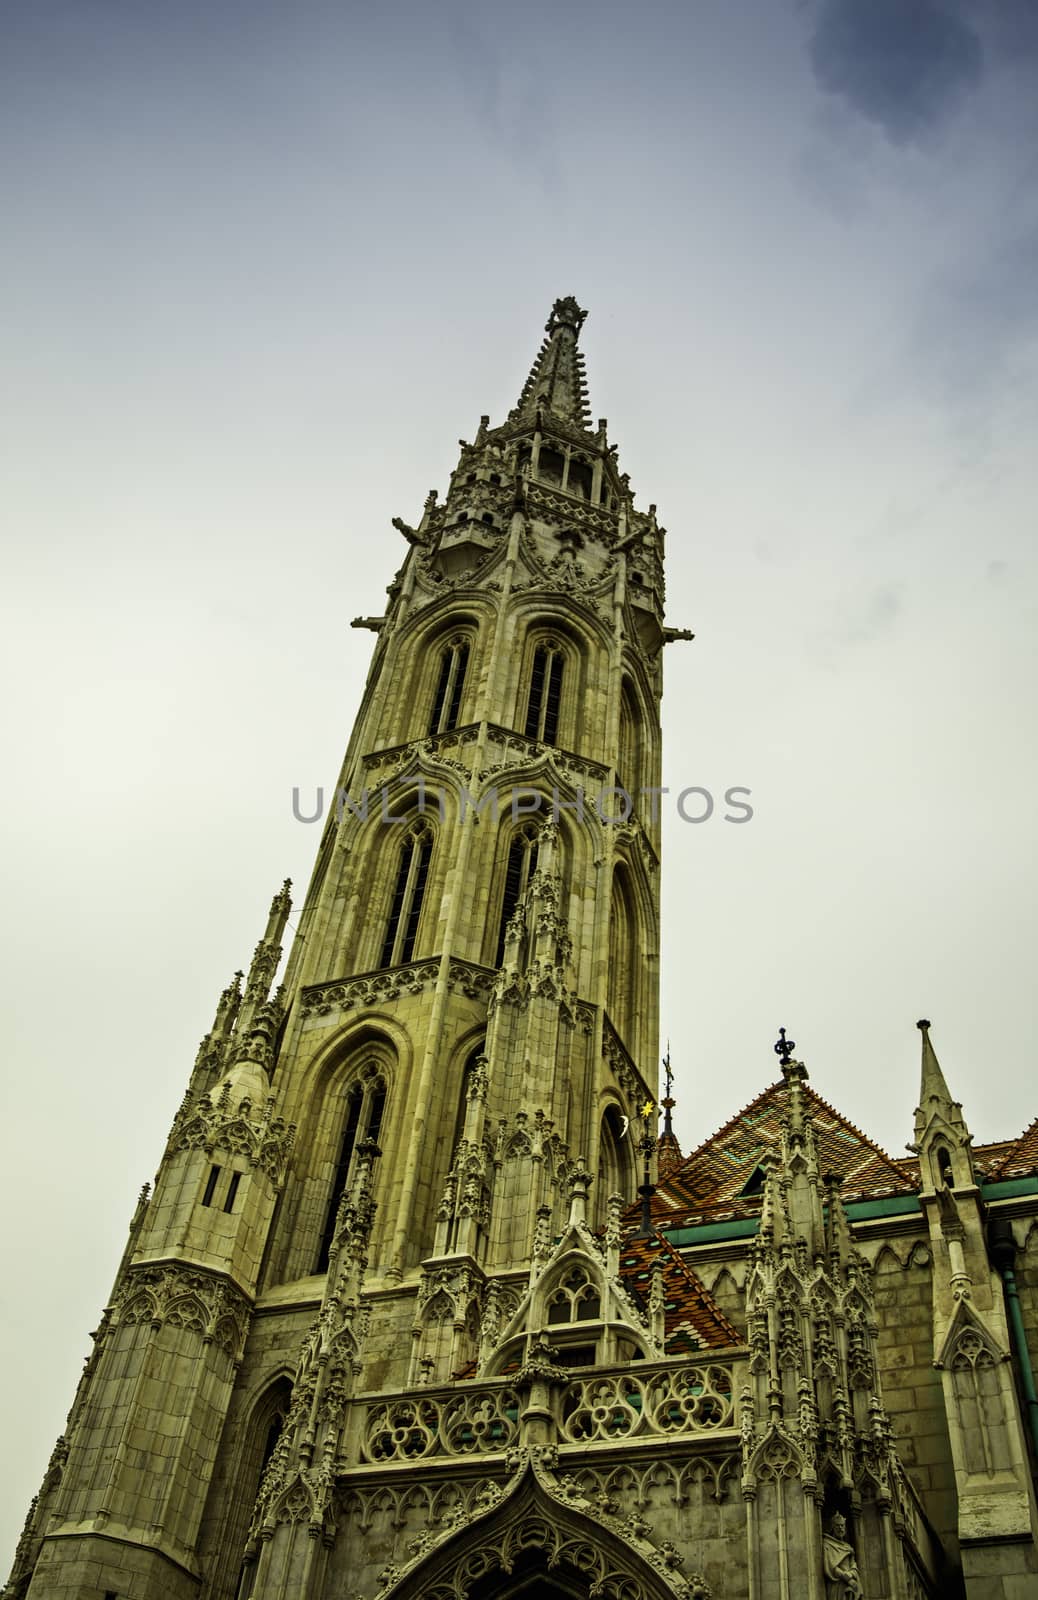 Bottom up view of the spire of Matthias Church in the Fisherman's Bastion in Budapest.